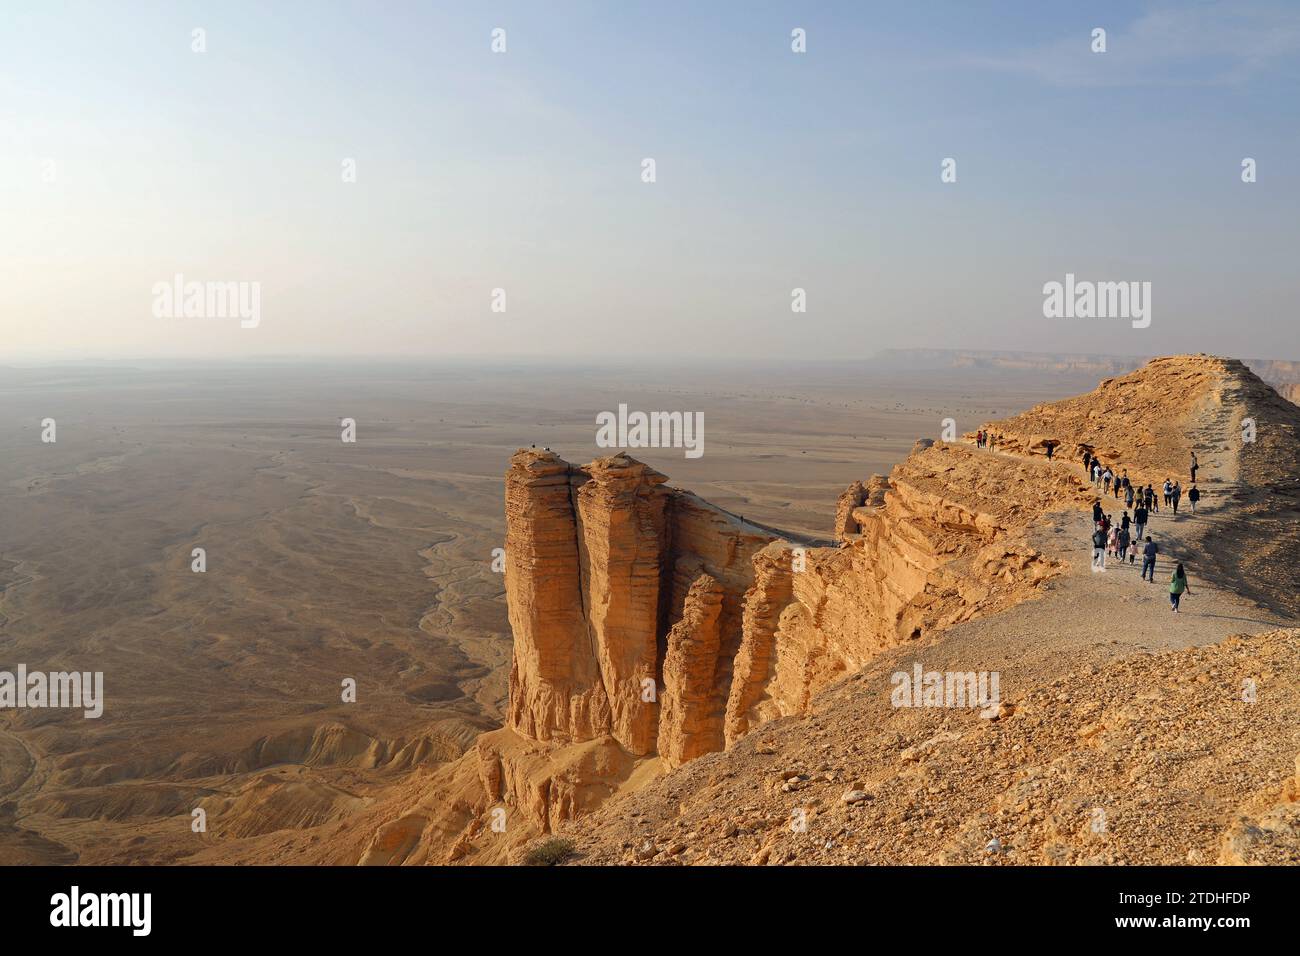 Tourists arriving for sunset at the Edge of the World in the desert of Saudi Arabia Stock Photo